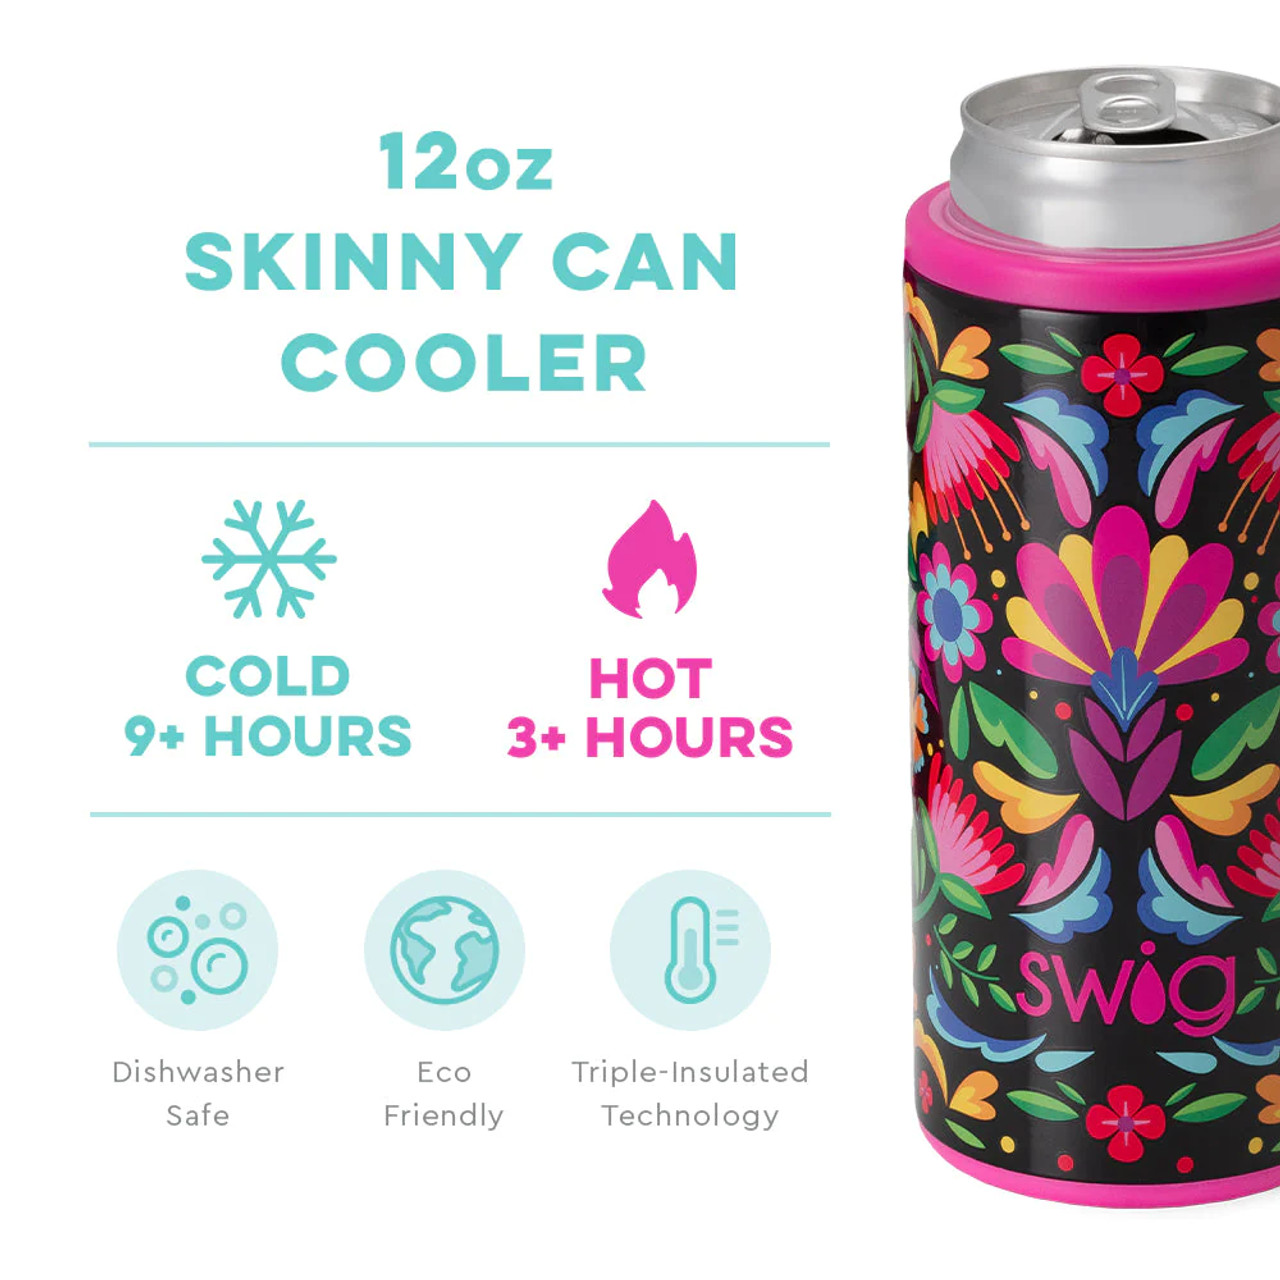 https://cdn11.bigcommerce.com/s-e3nb6xi/images/stencil/1280x1280/products/25248/126937/swig-life-signature-12oz-insulated-stainless-steel-skinny-can-cooler-caliente-temp-info__45503.1689104387.jpg?c=2